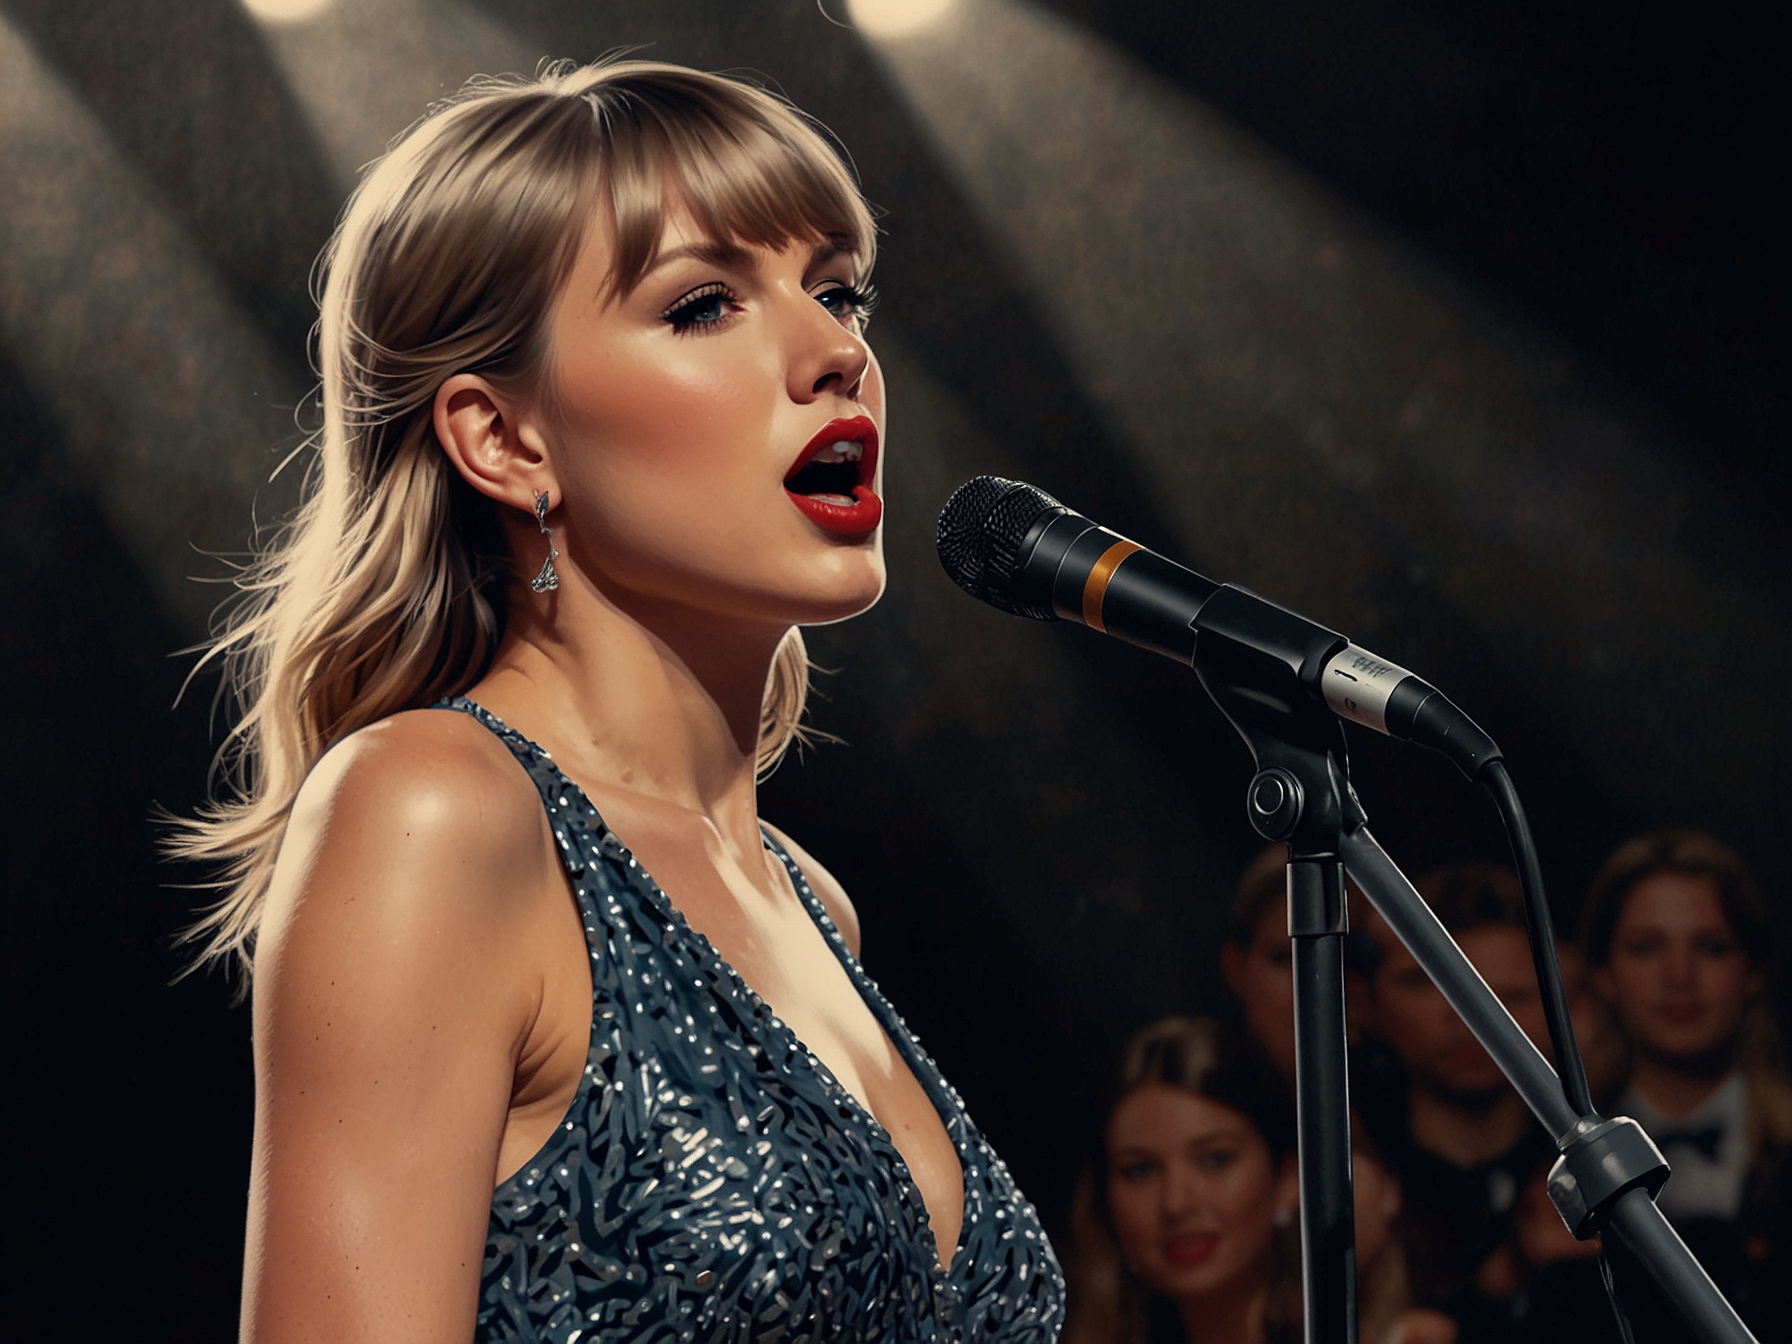 Taylor Swift performing on stage, hinting at her focus on her music career. Her song lyrics often provided clues about her relationship with Joe Alwyn, capturing various phases of their romance.